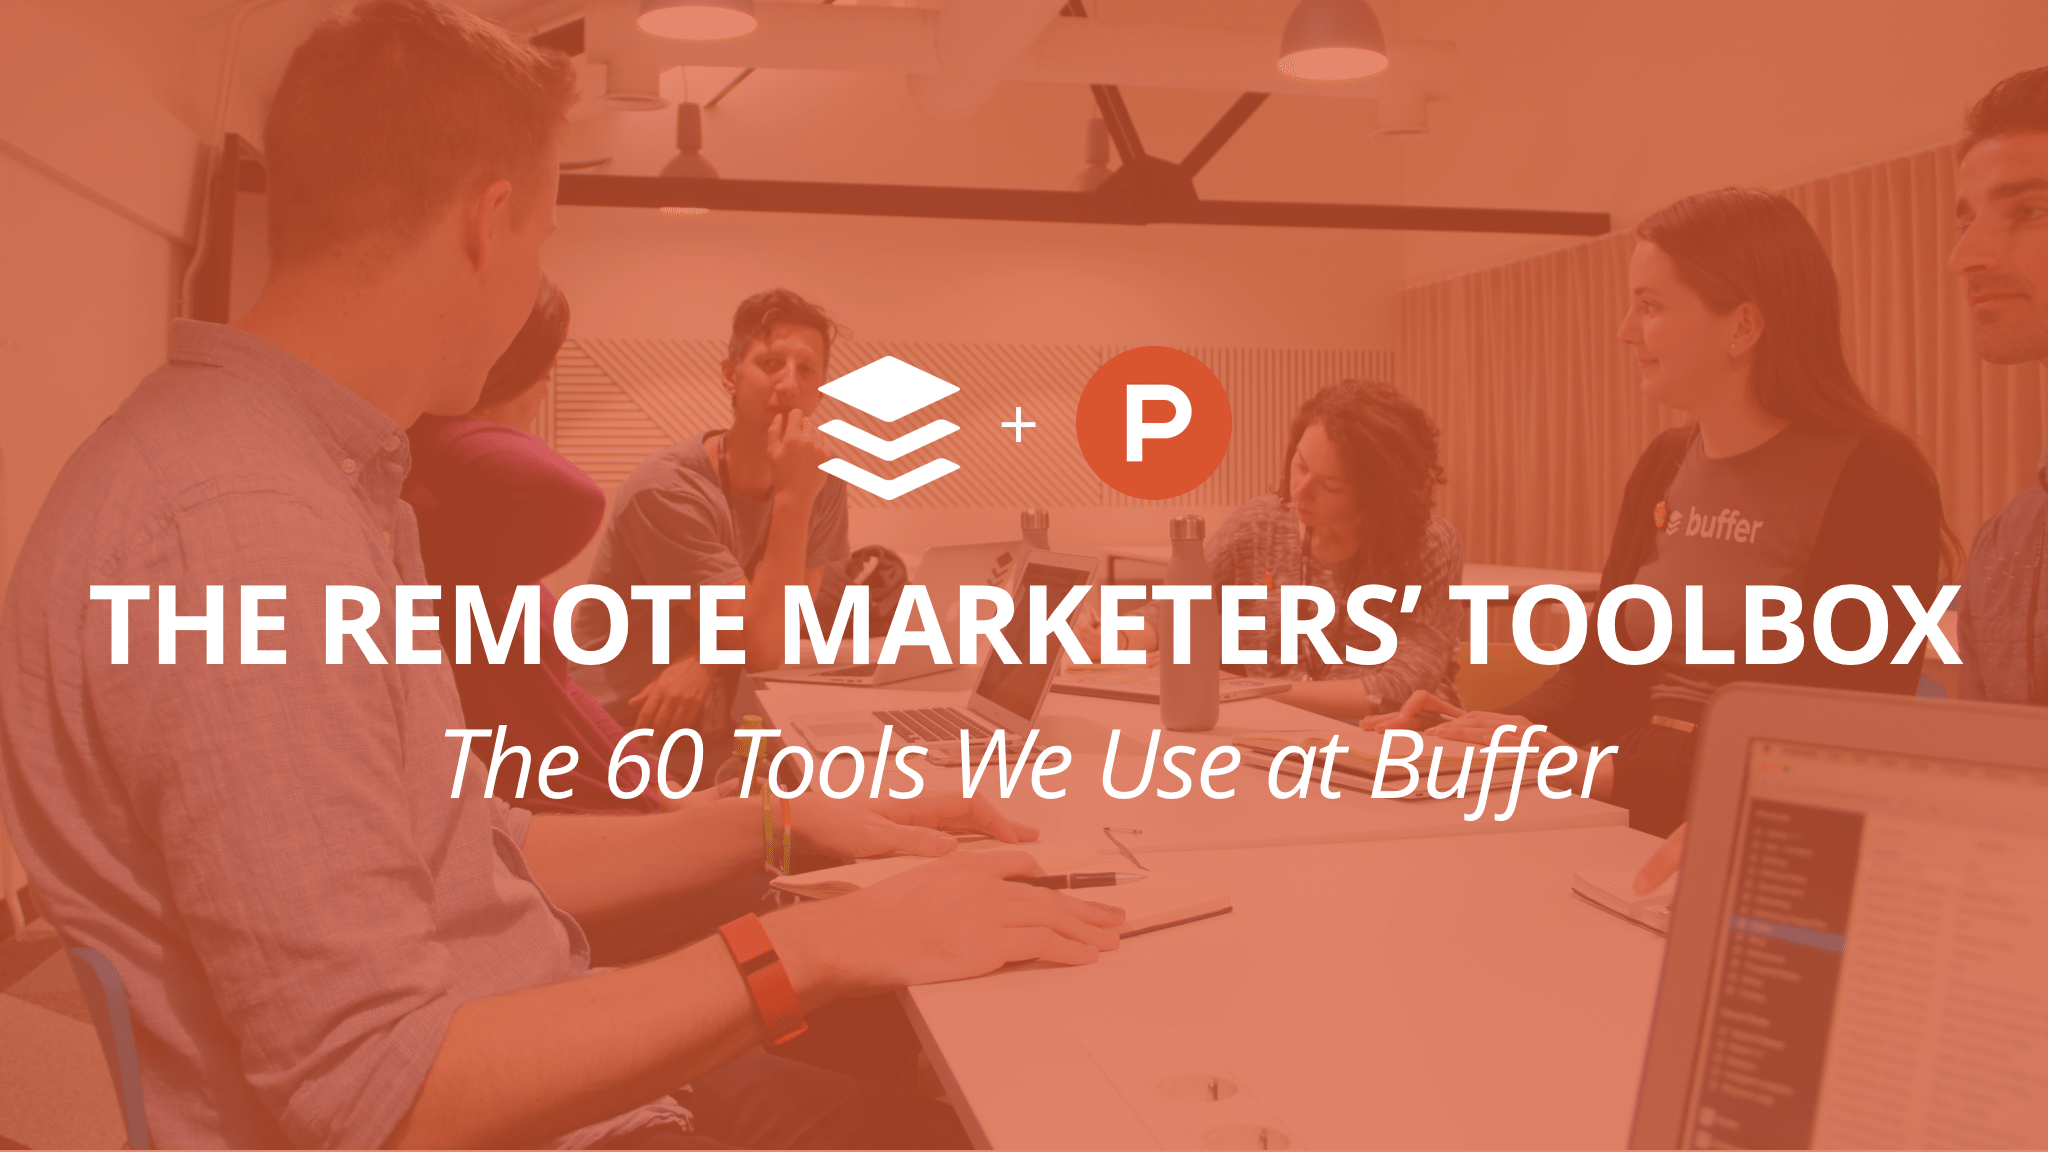 The Remote Marketers Toolbox: The 60 Marketing Tools We Use at Buffer